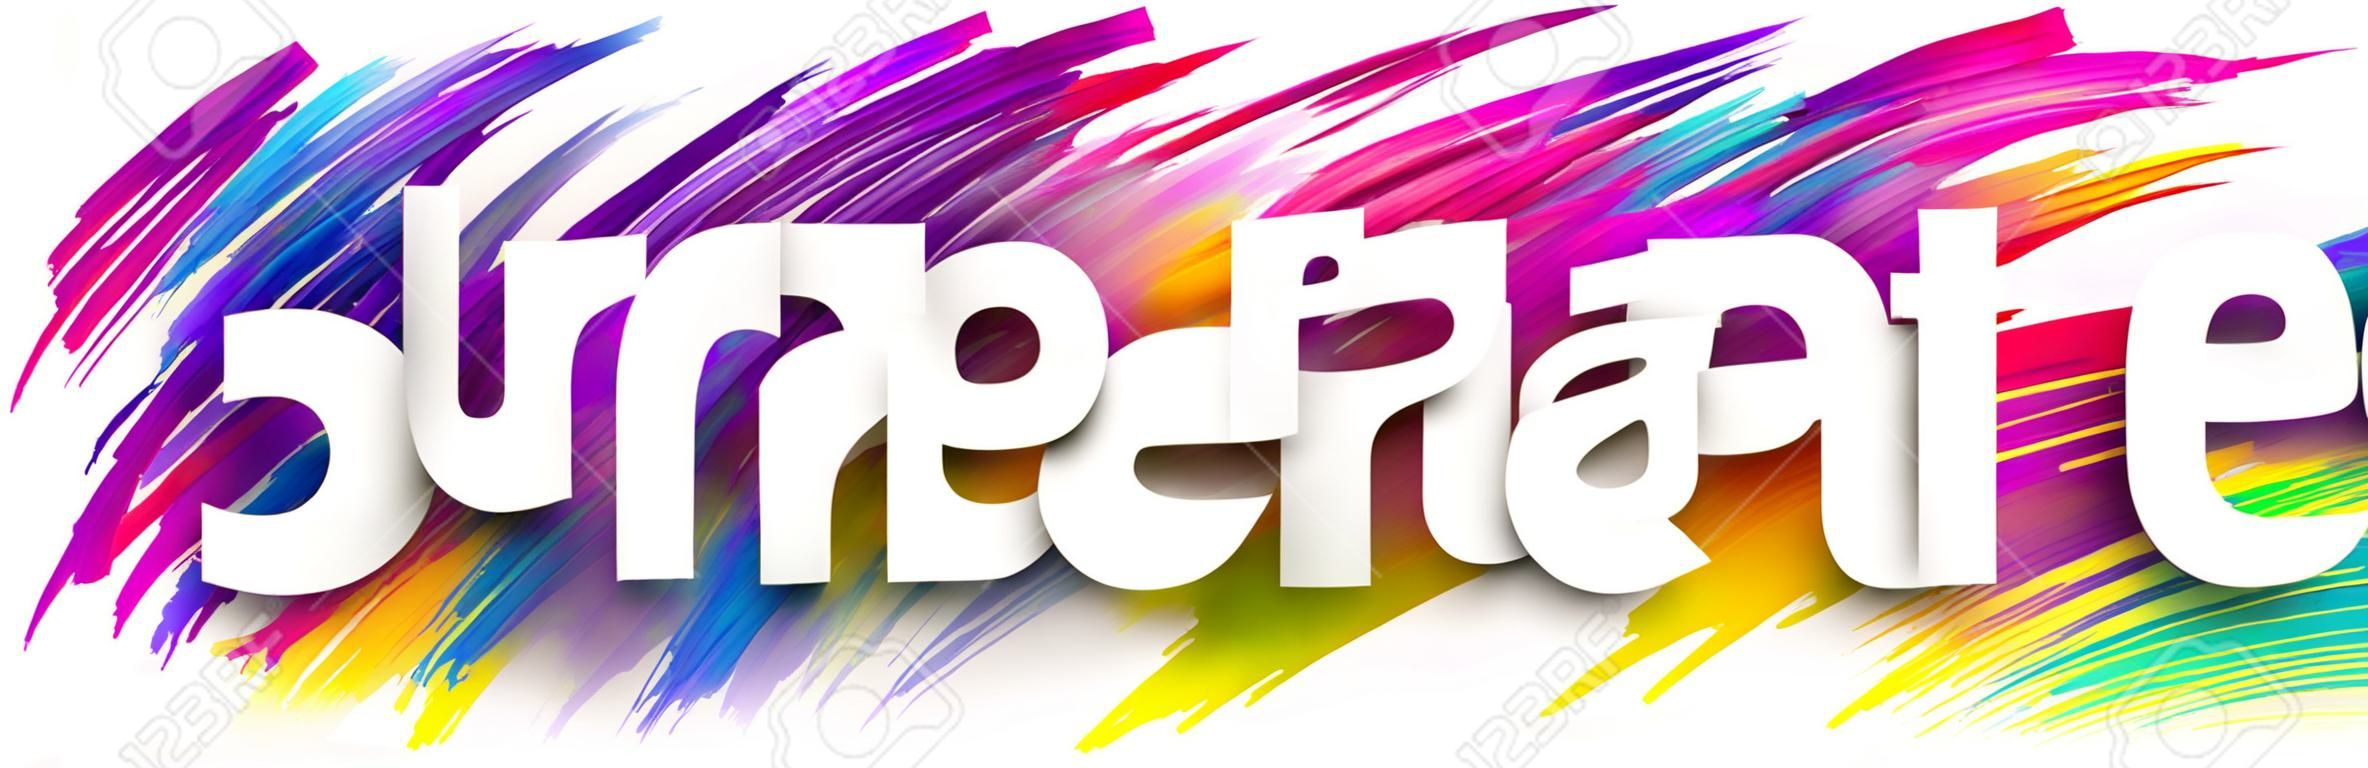 Small letters just breathe sign on multi-colored brush strokes background. Vector design element for banners, posters, cards, website.